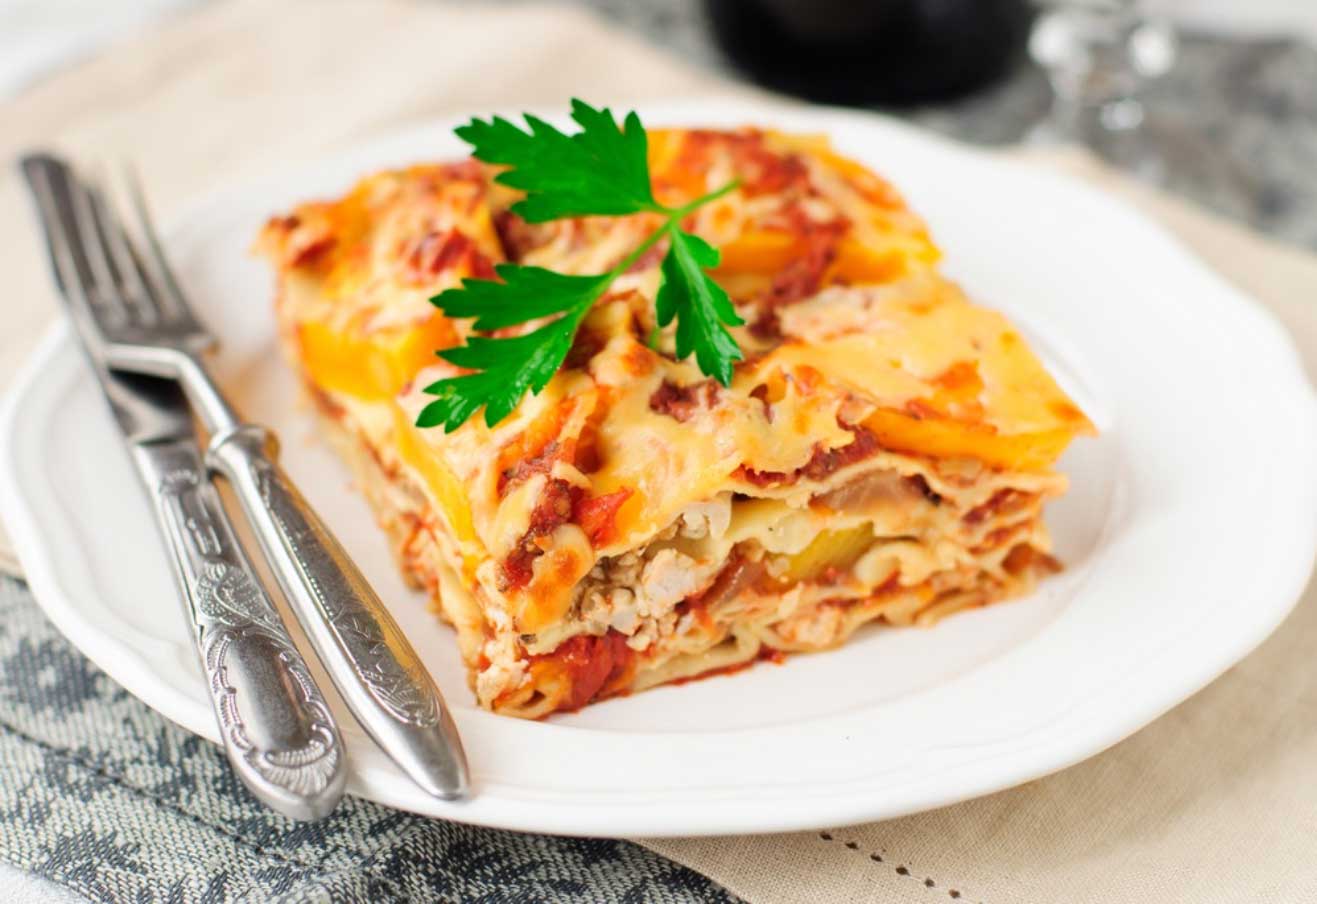 What a fun and playful way to use up leftover turkey! Instant Pot Turkey and Sweet Potato Lasagna is the perfect reason to cook an extra-big bird!